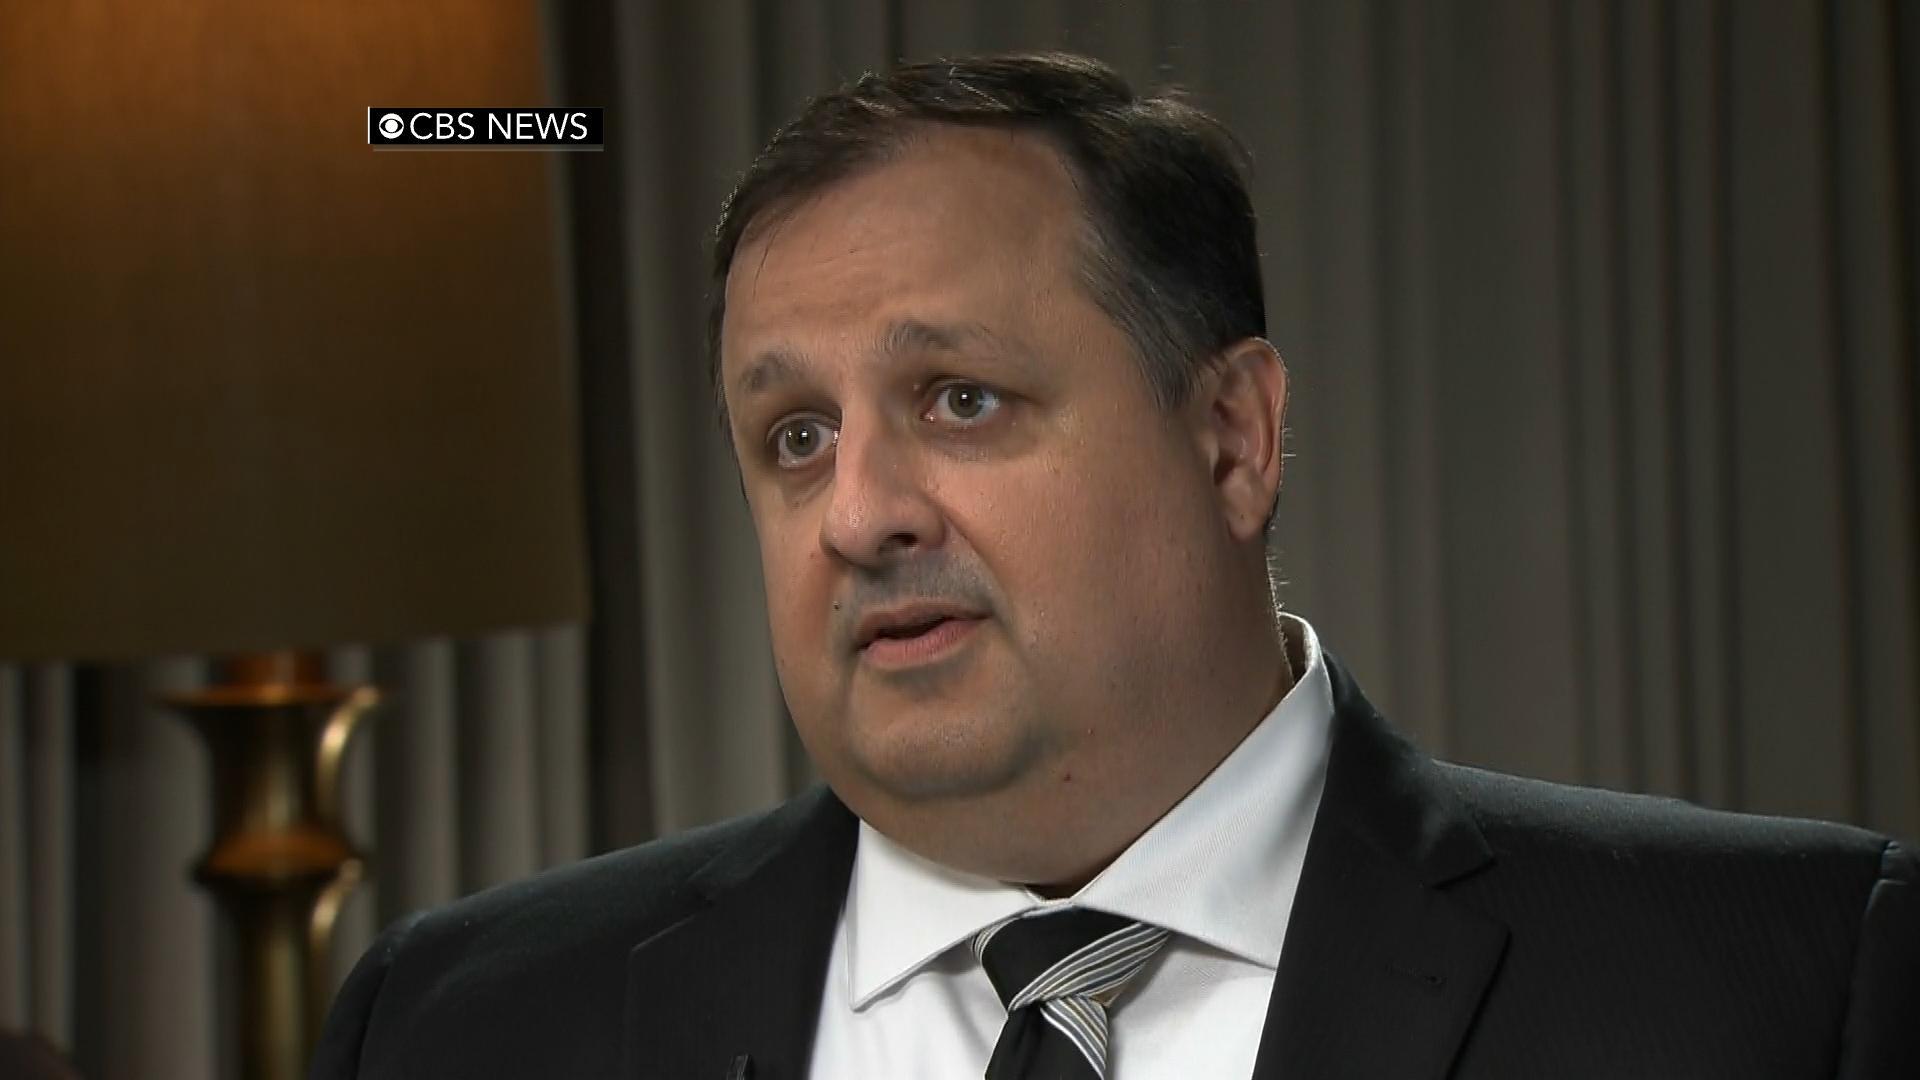 Walter Shaub says America should have right to know motivations of its leaders - CBS News